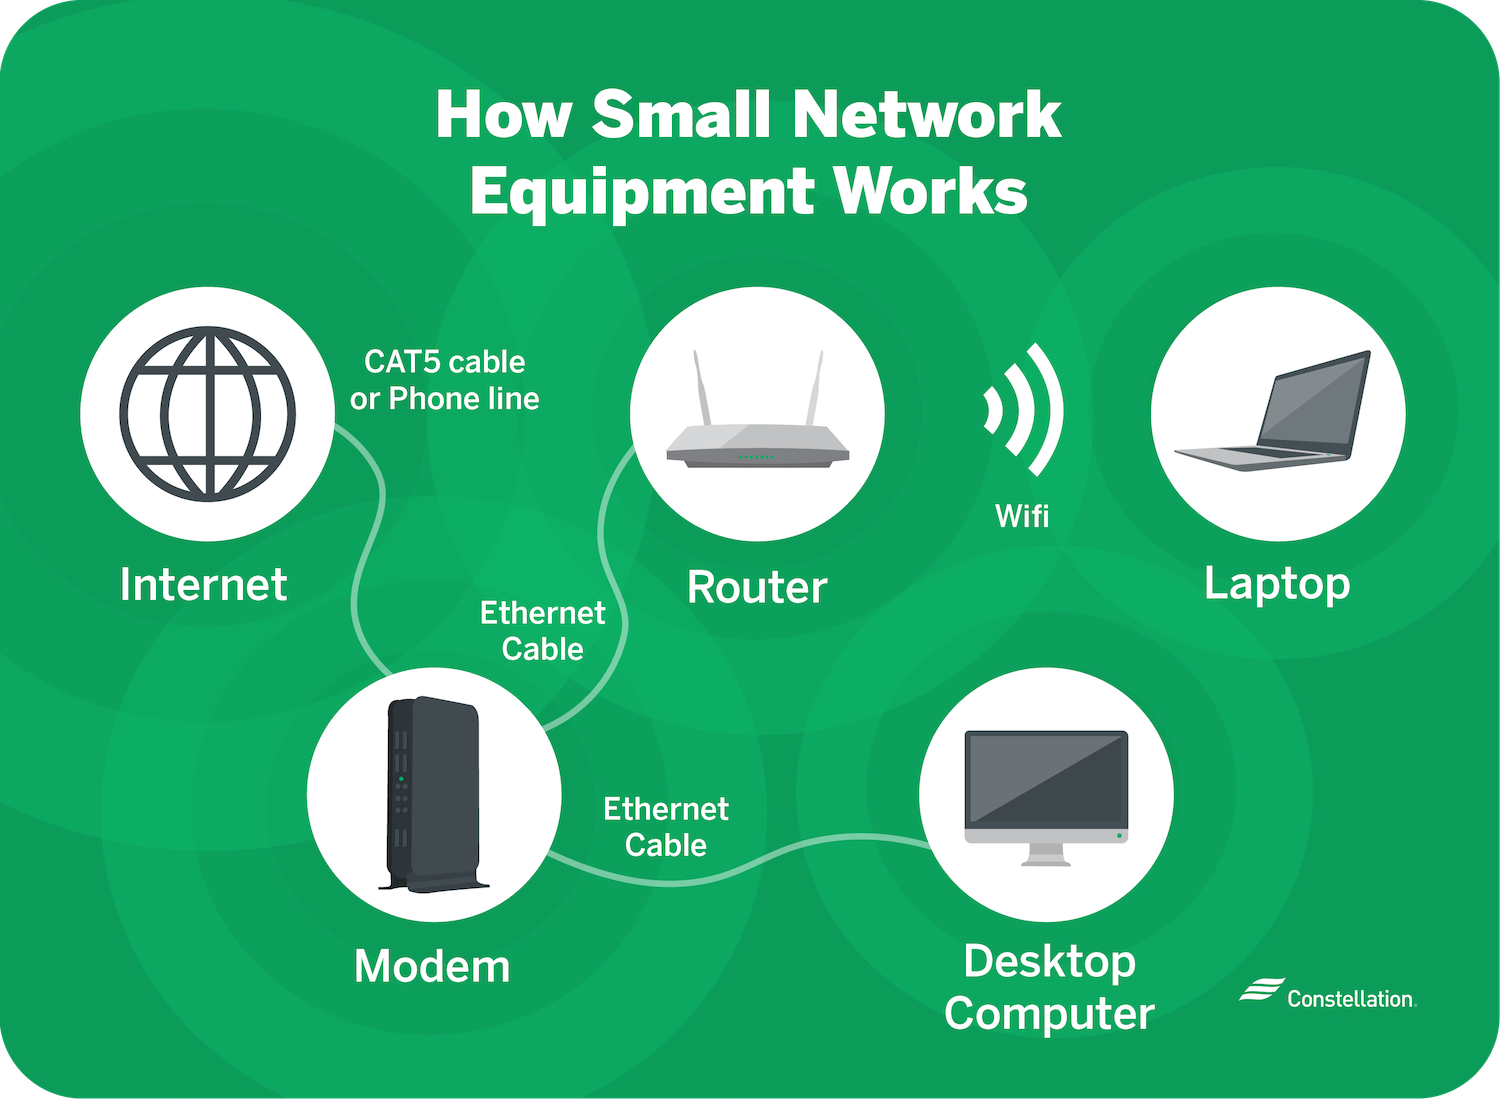 Small network equipment works by sending Internet through your modem to your router, and then uses wifi to transfer to your devices